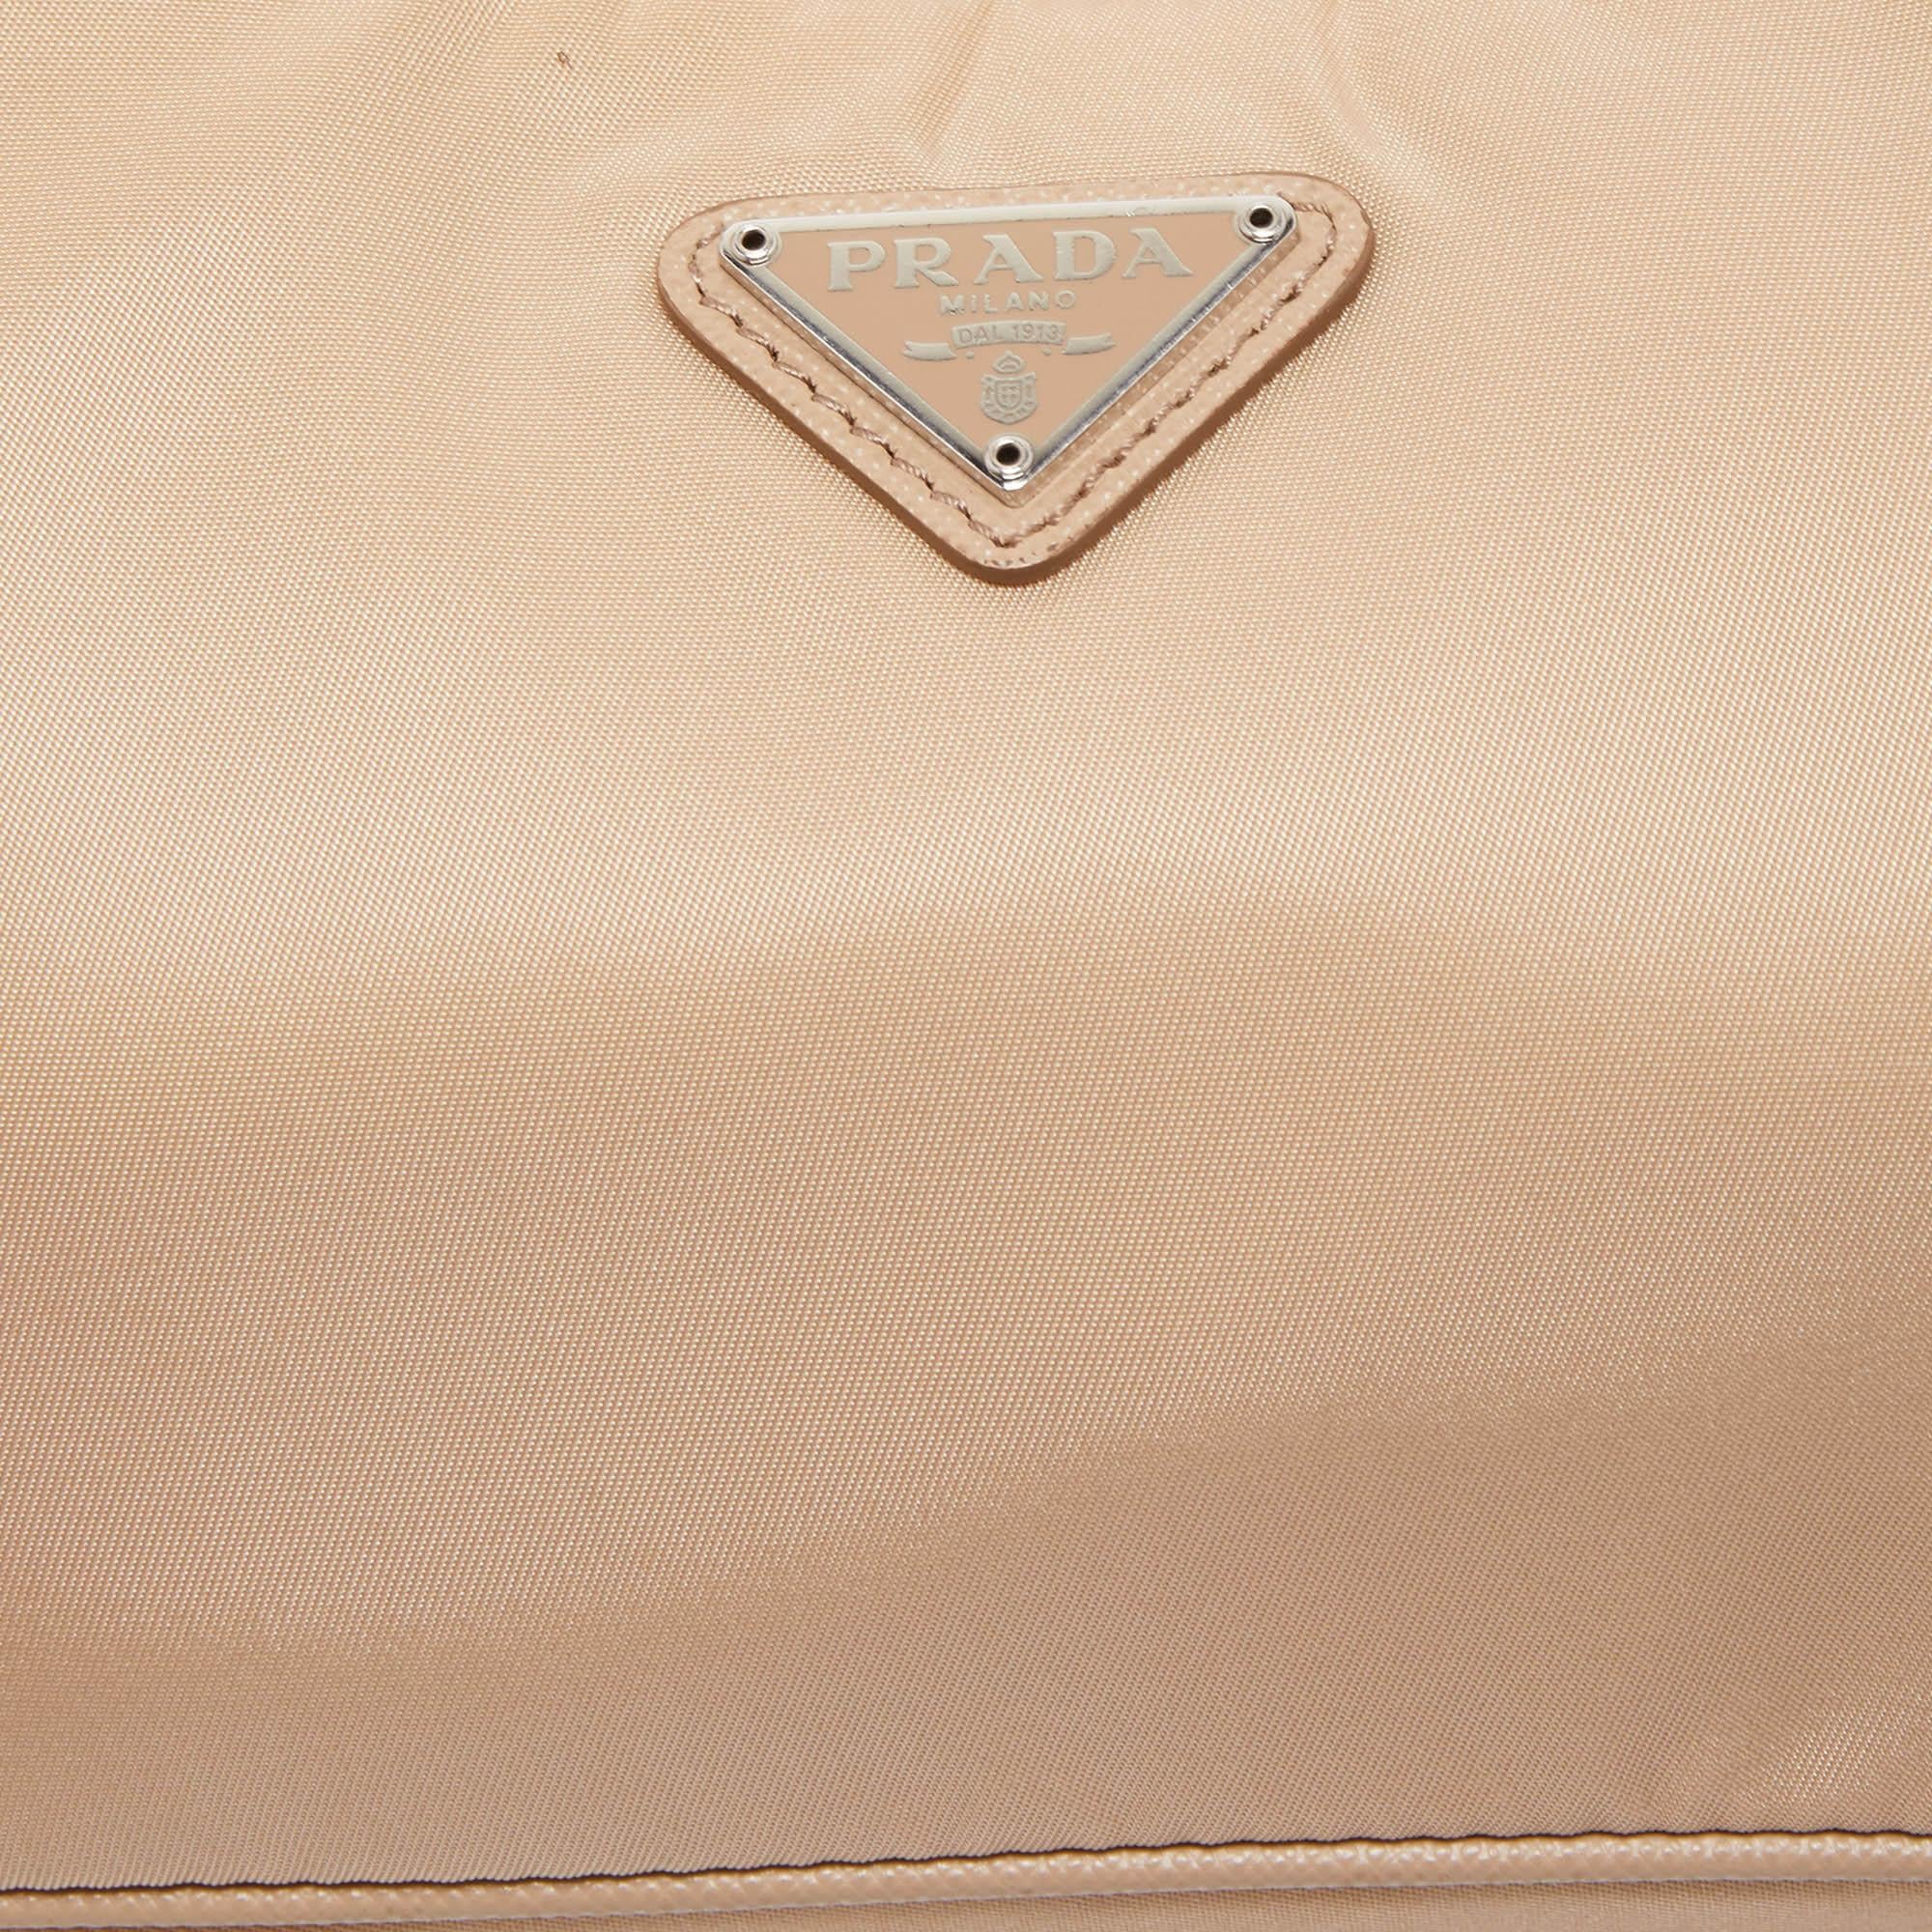 Prada Beige Nylon and Leather Re-Edition 2005 Baguette Bag 2